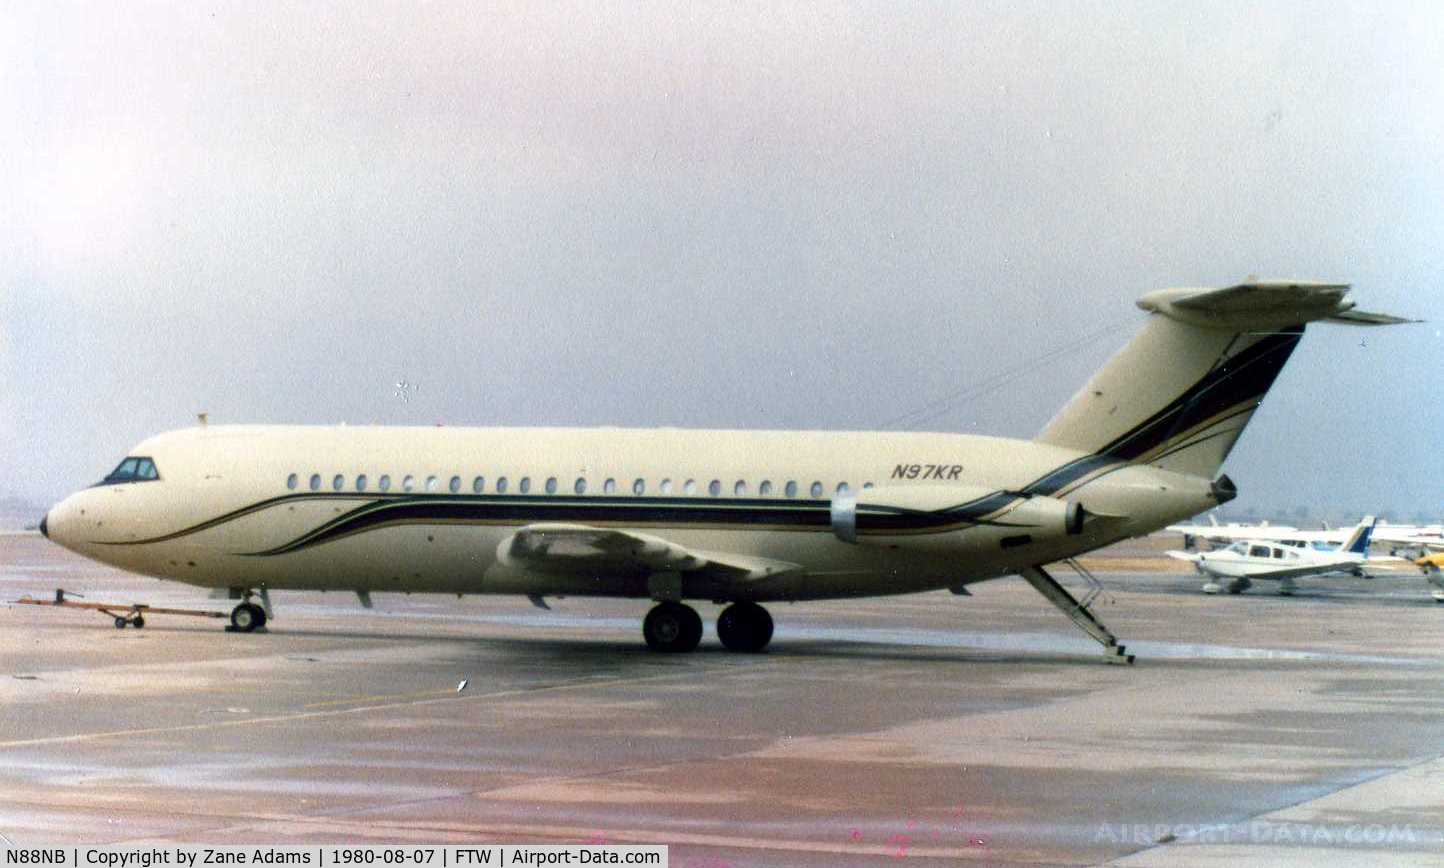 N88NB, 1963 BAC 111-201ZAC One-Eleven C/N BAC.005, Registered as N97KR ...owned by Kenny Rogers